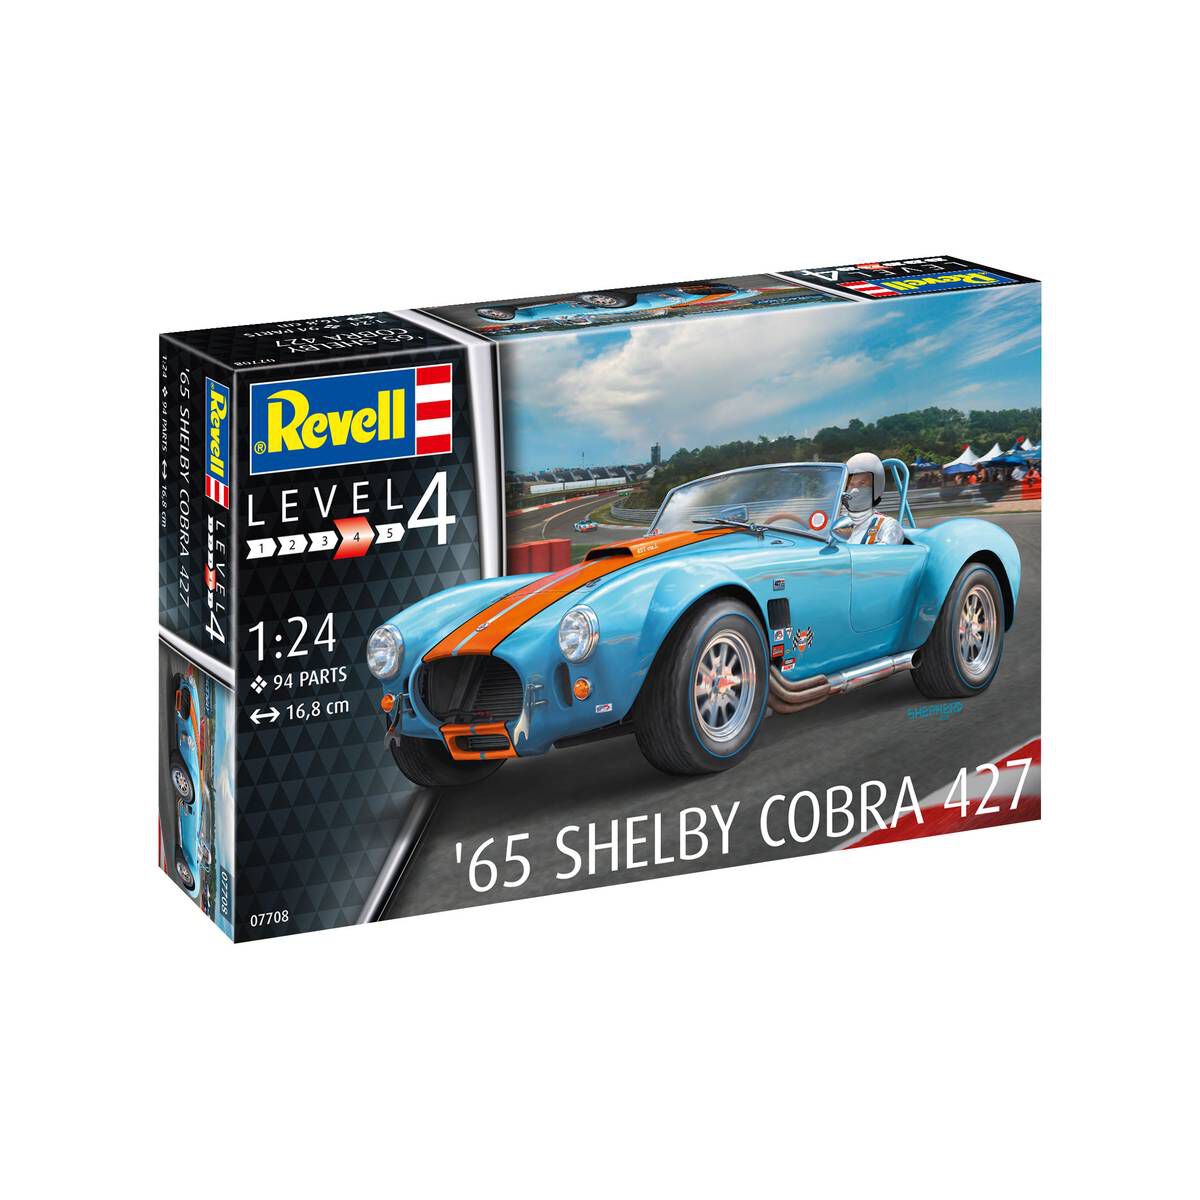 Shelby Cobra 427 MADE IN England